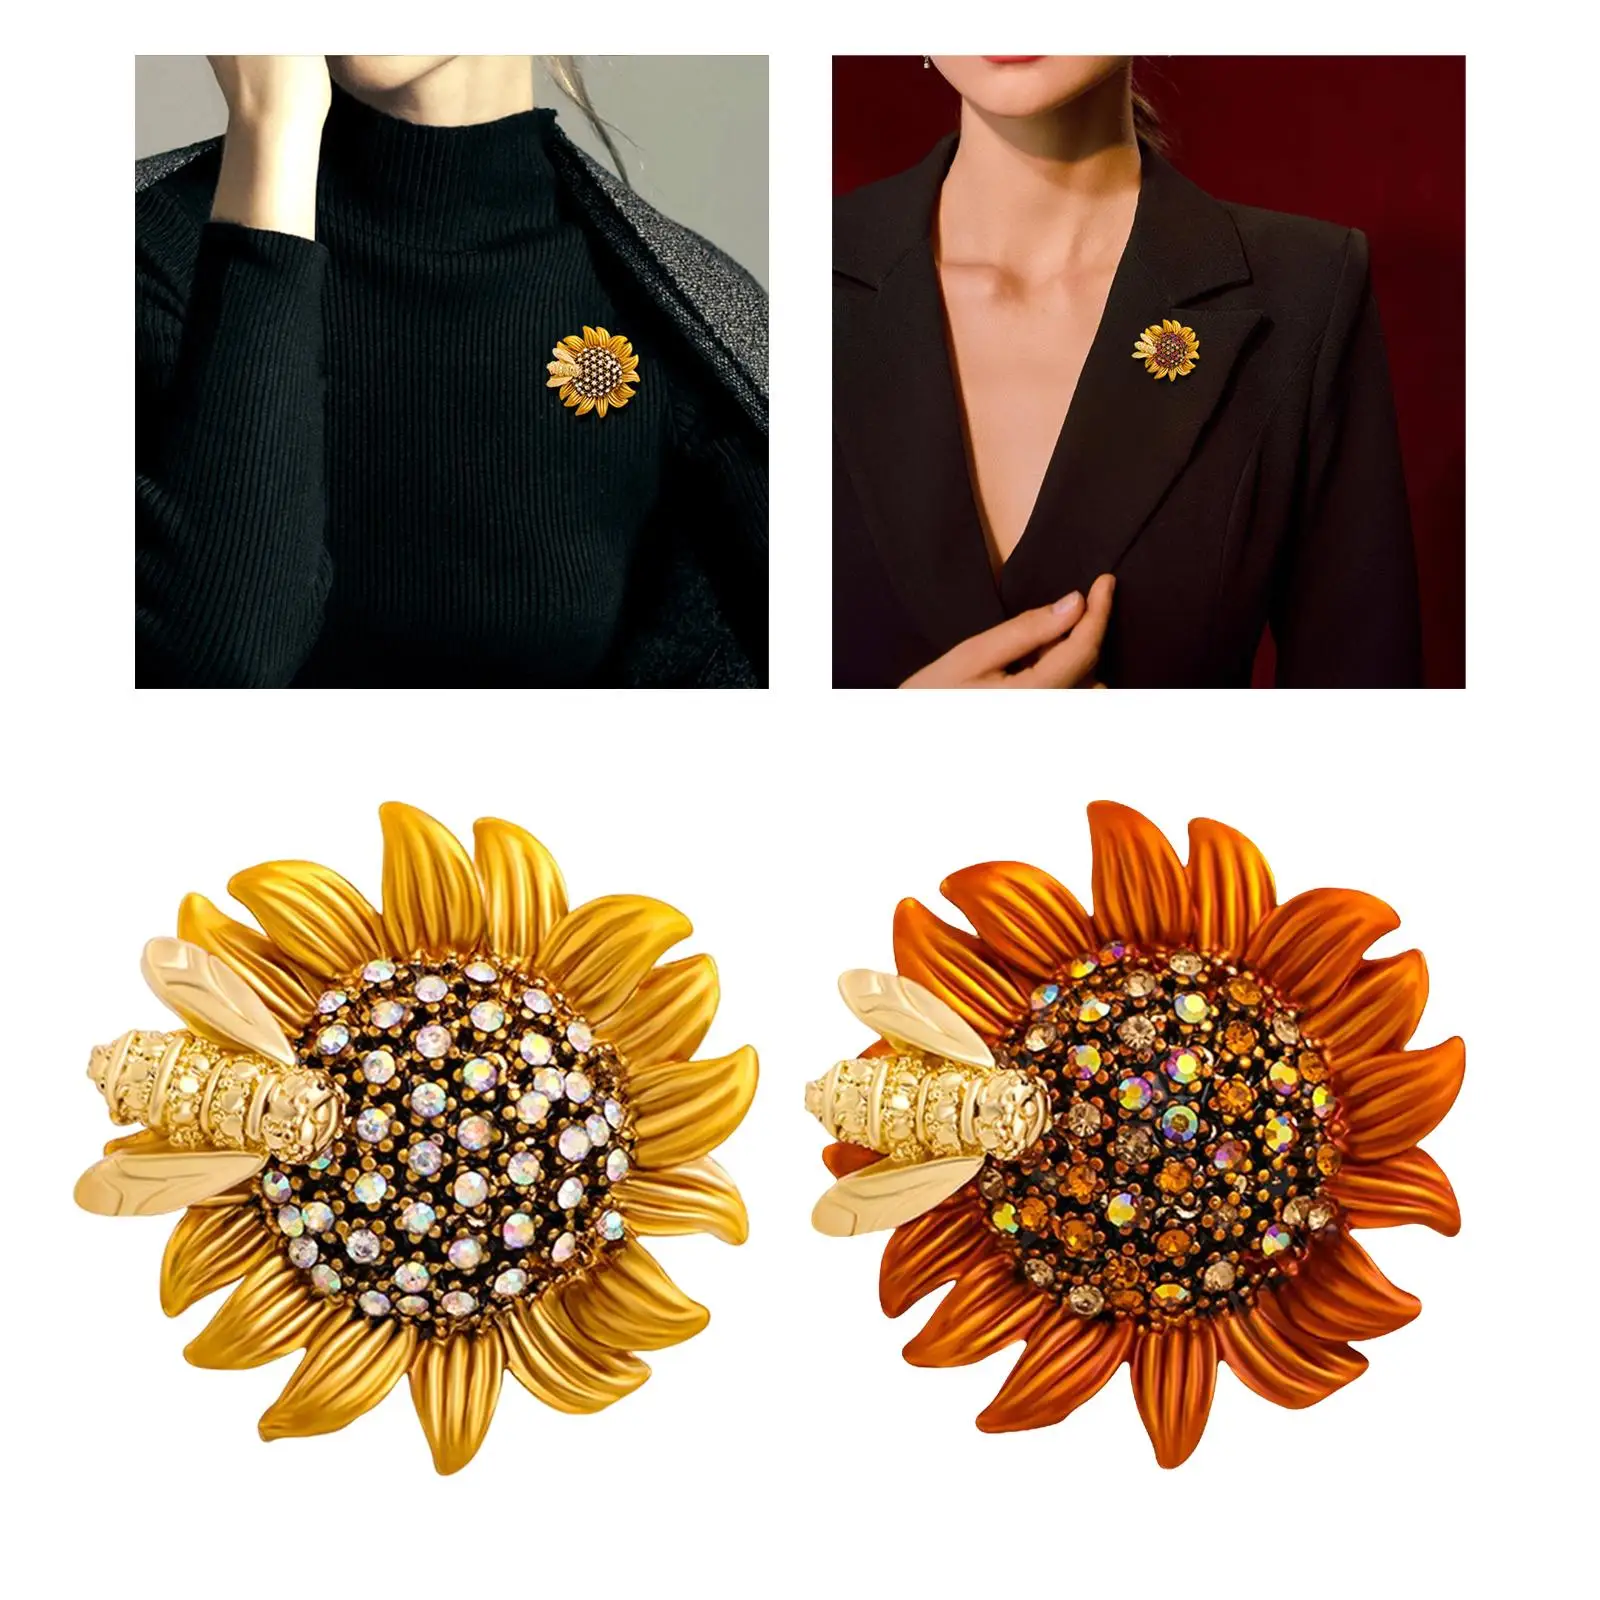 Lapel Pin for Sweaters,Dresses And Business Suits Embellishment to Any Outfit Exquisite Practical Decorative Safety Brooches